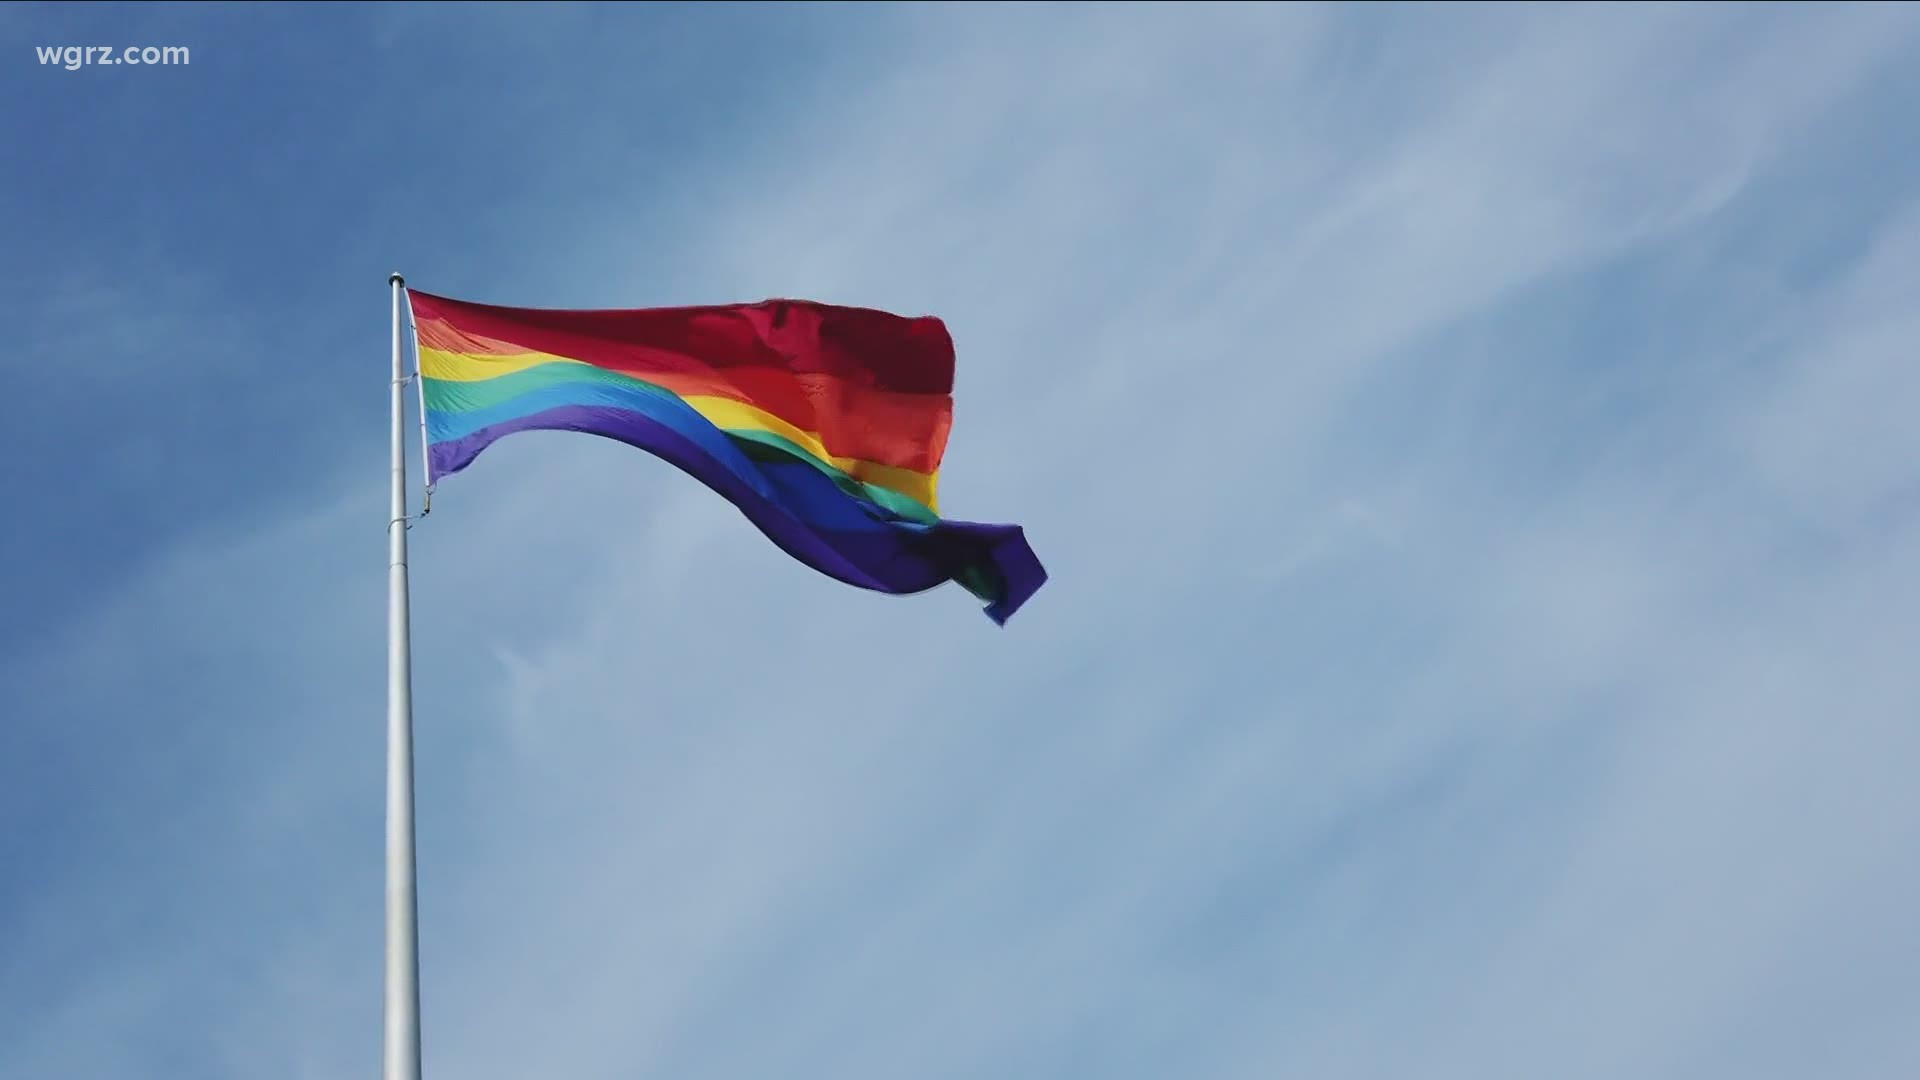 It's a special year for the city of Jamestown, which will be hosting its first pride festival on June 12th.